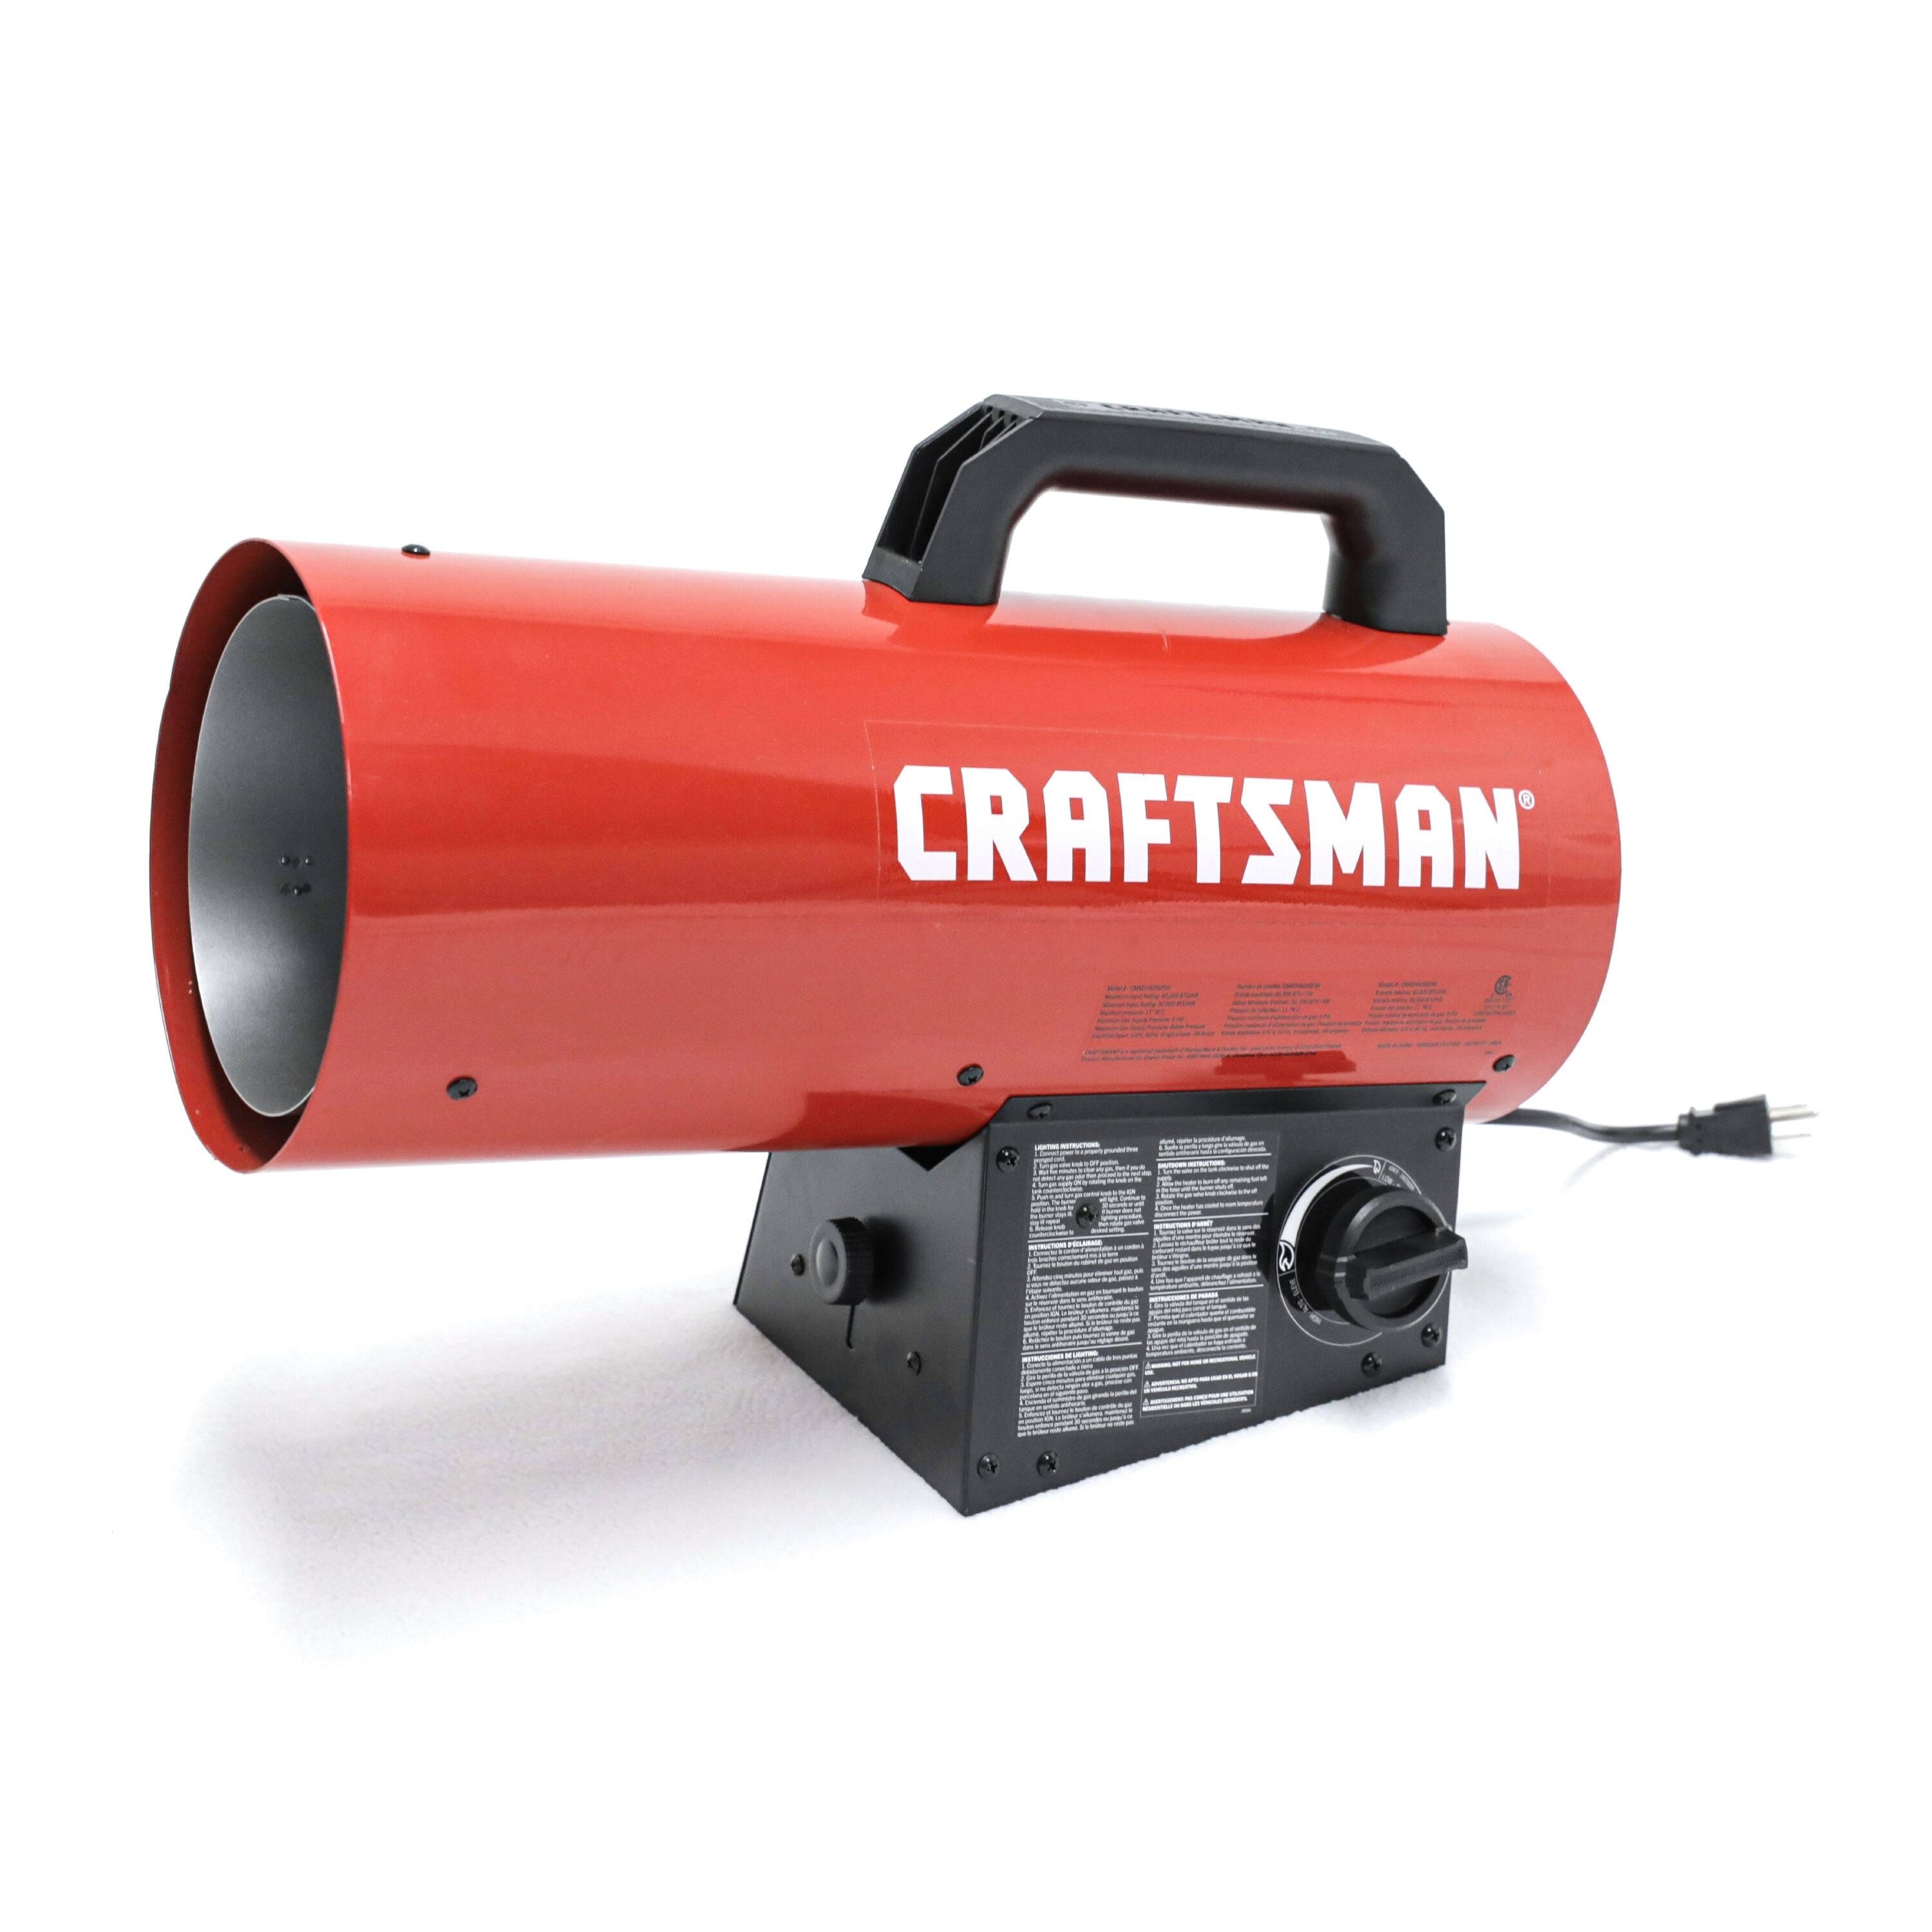 Powerful Craftsman Propane Heater with Overheat Protection - Portable 60,000 BTU Heating Solution | Image